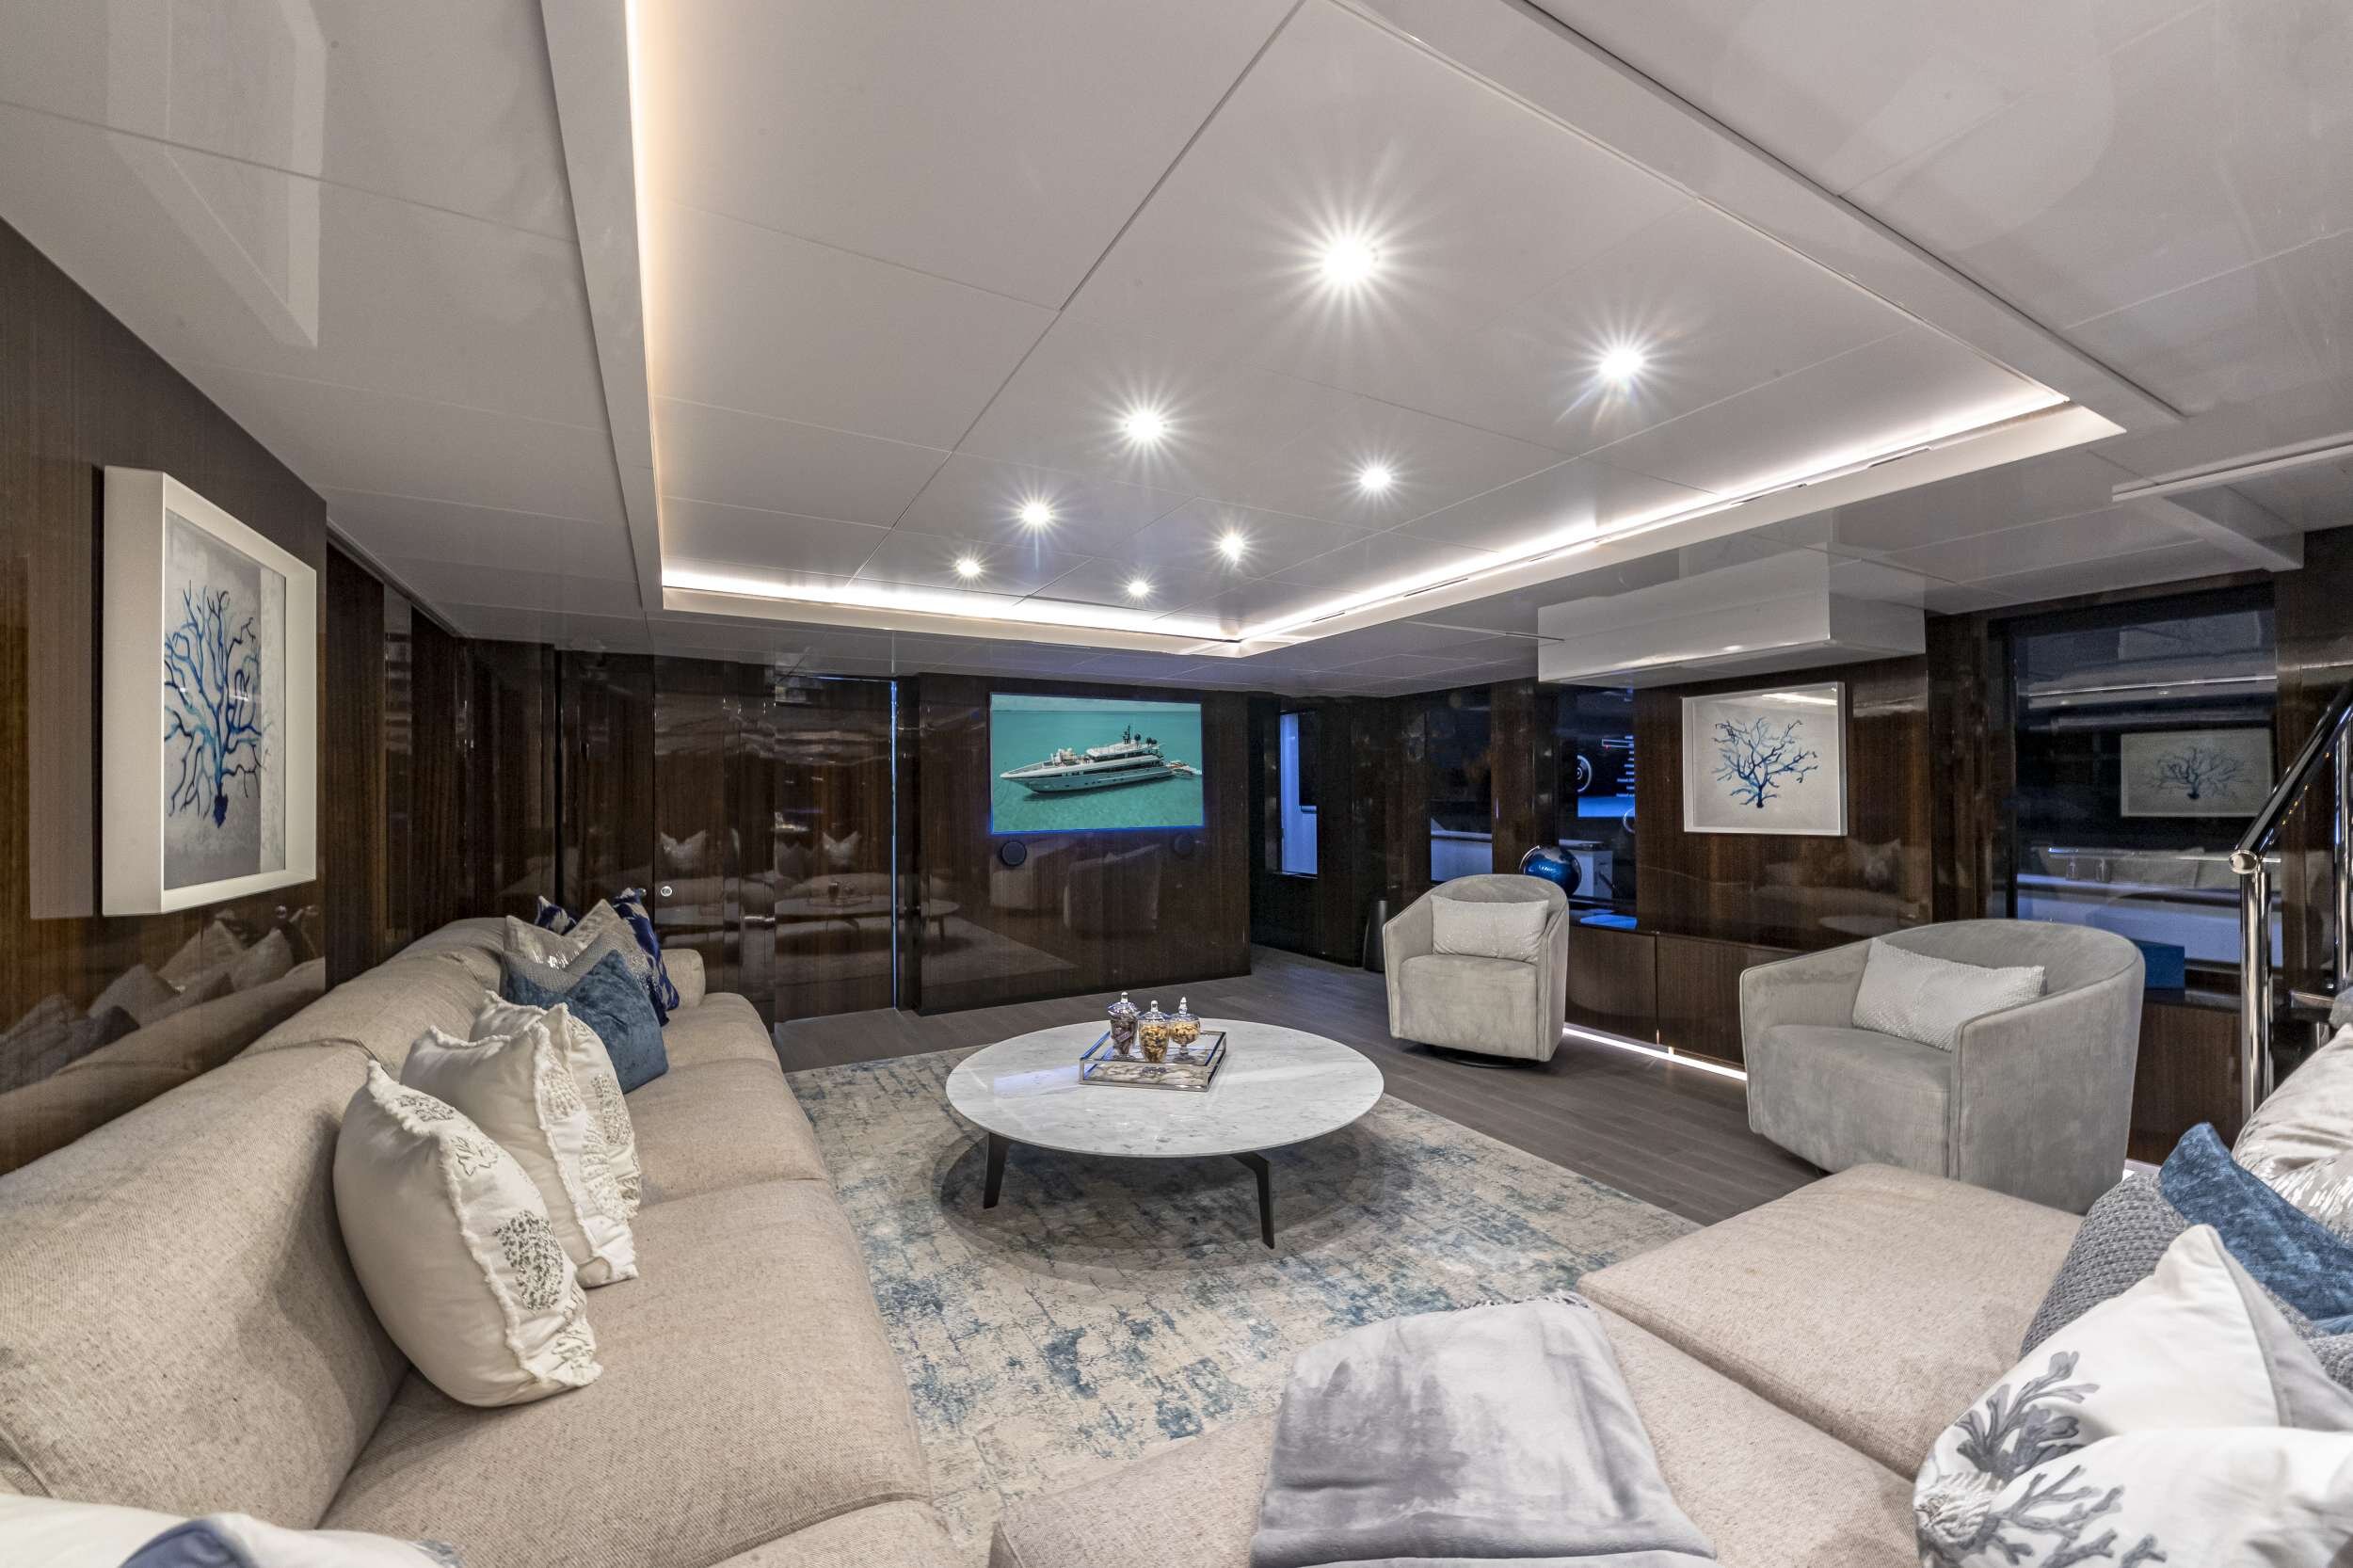 Oculus- Seaduction Yacht Charters